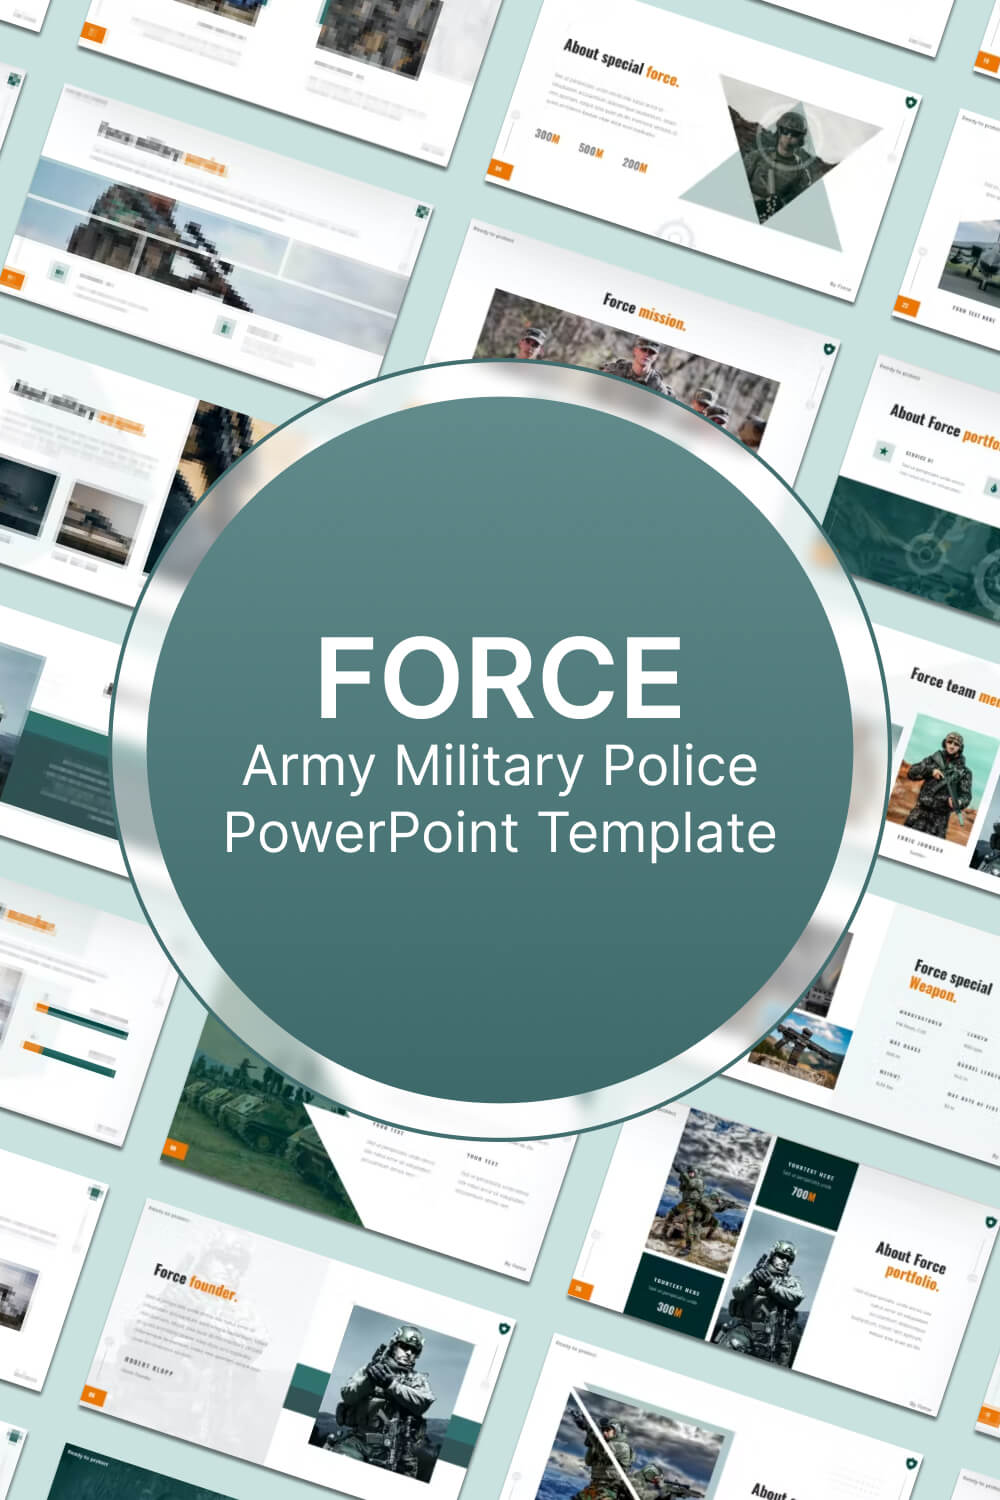 Lots of military police powerpoint template slides, round green army logo in the center.